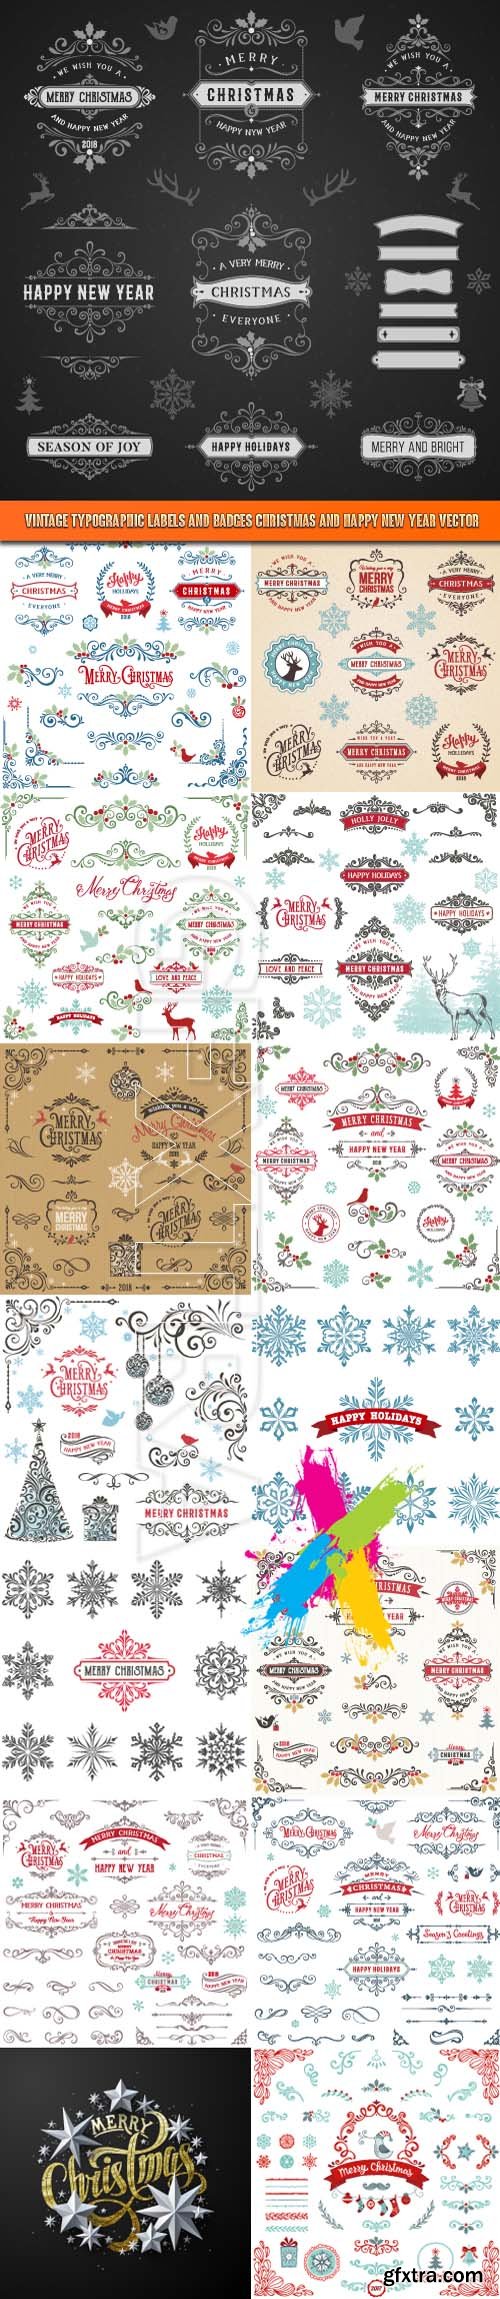 Vintage typographic labels and badges Christmas and Happy New Year vector